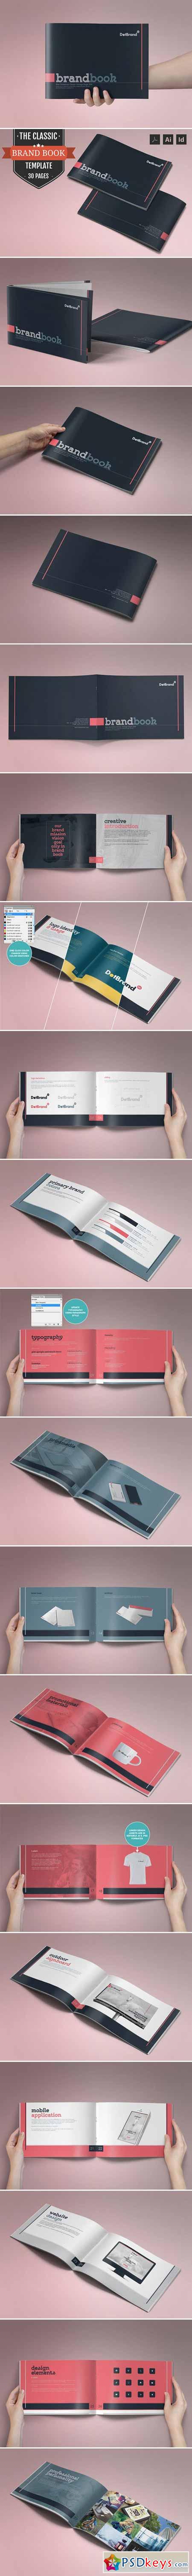 The Classic-Brand Guidelines Templat 395575